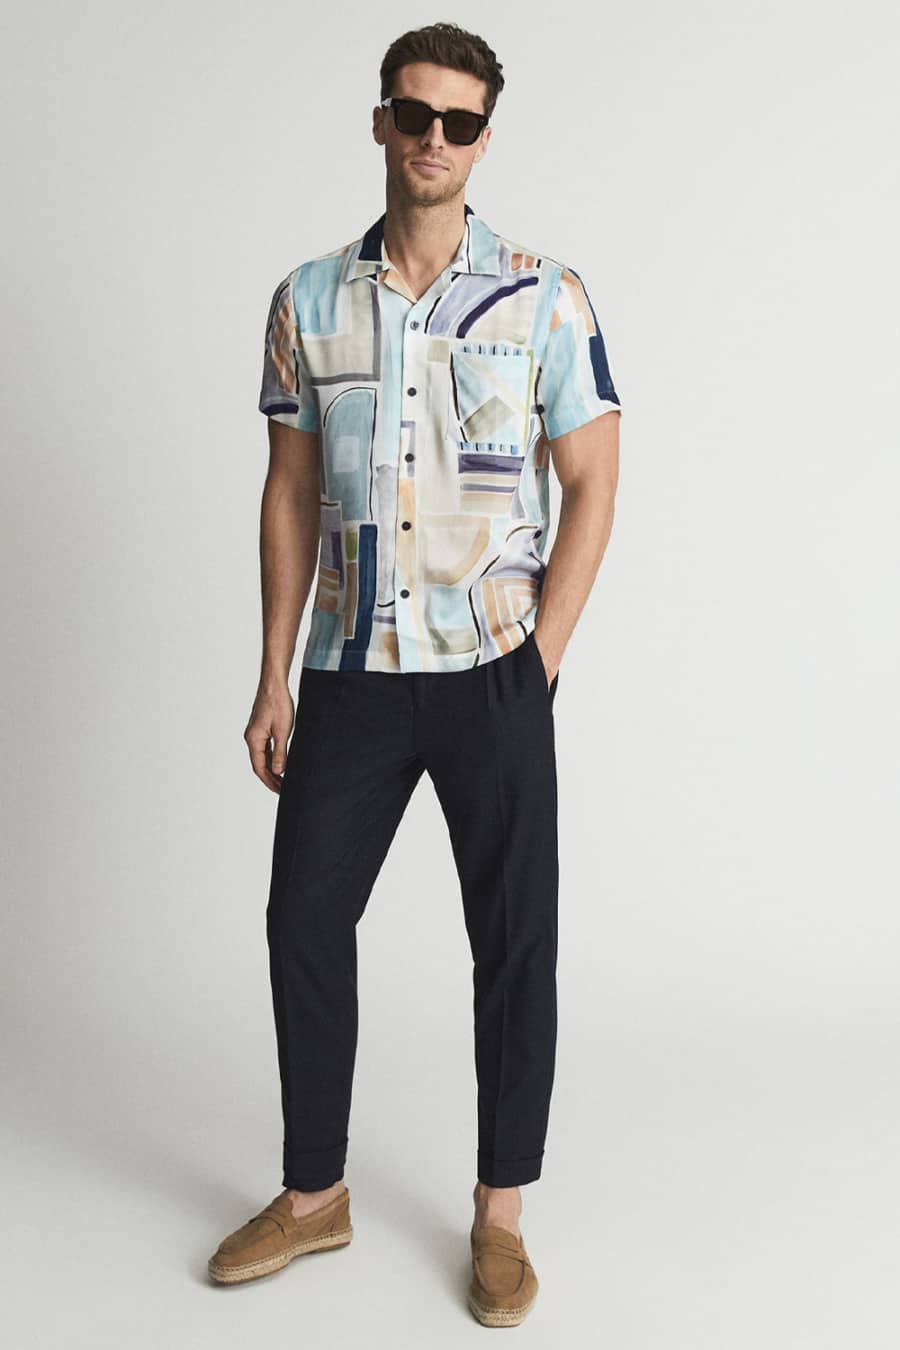 Men's printed cuban collar shirt and chinos outfit worn with espadrilles